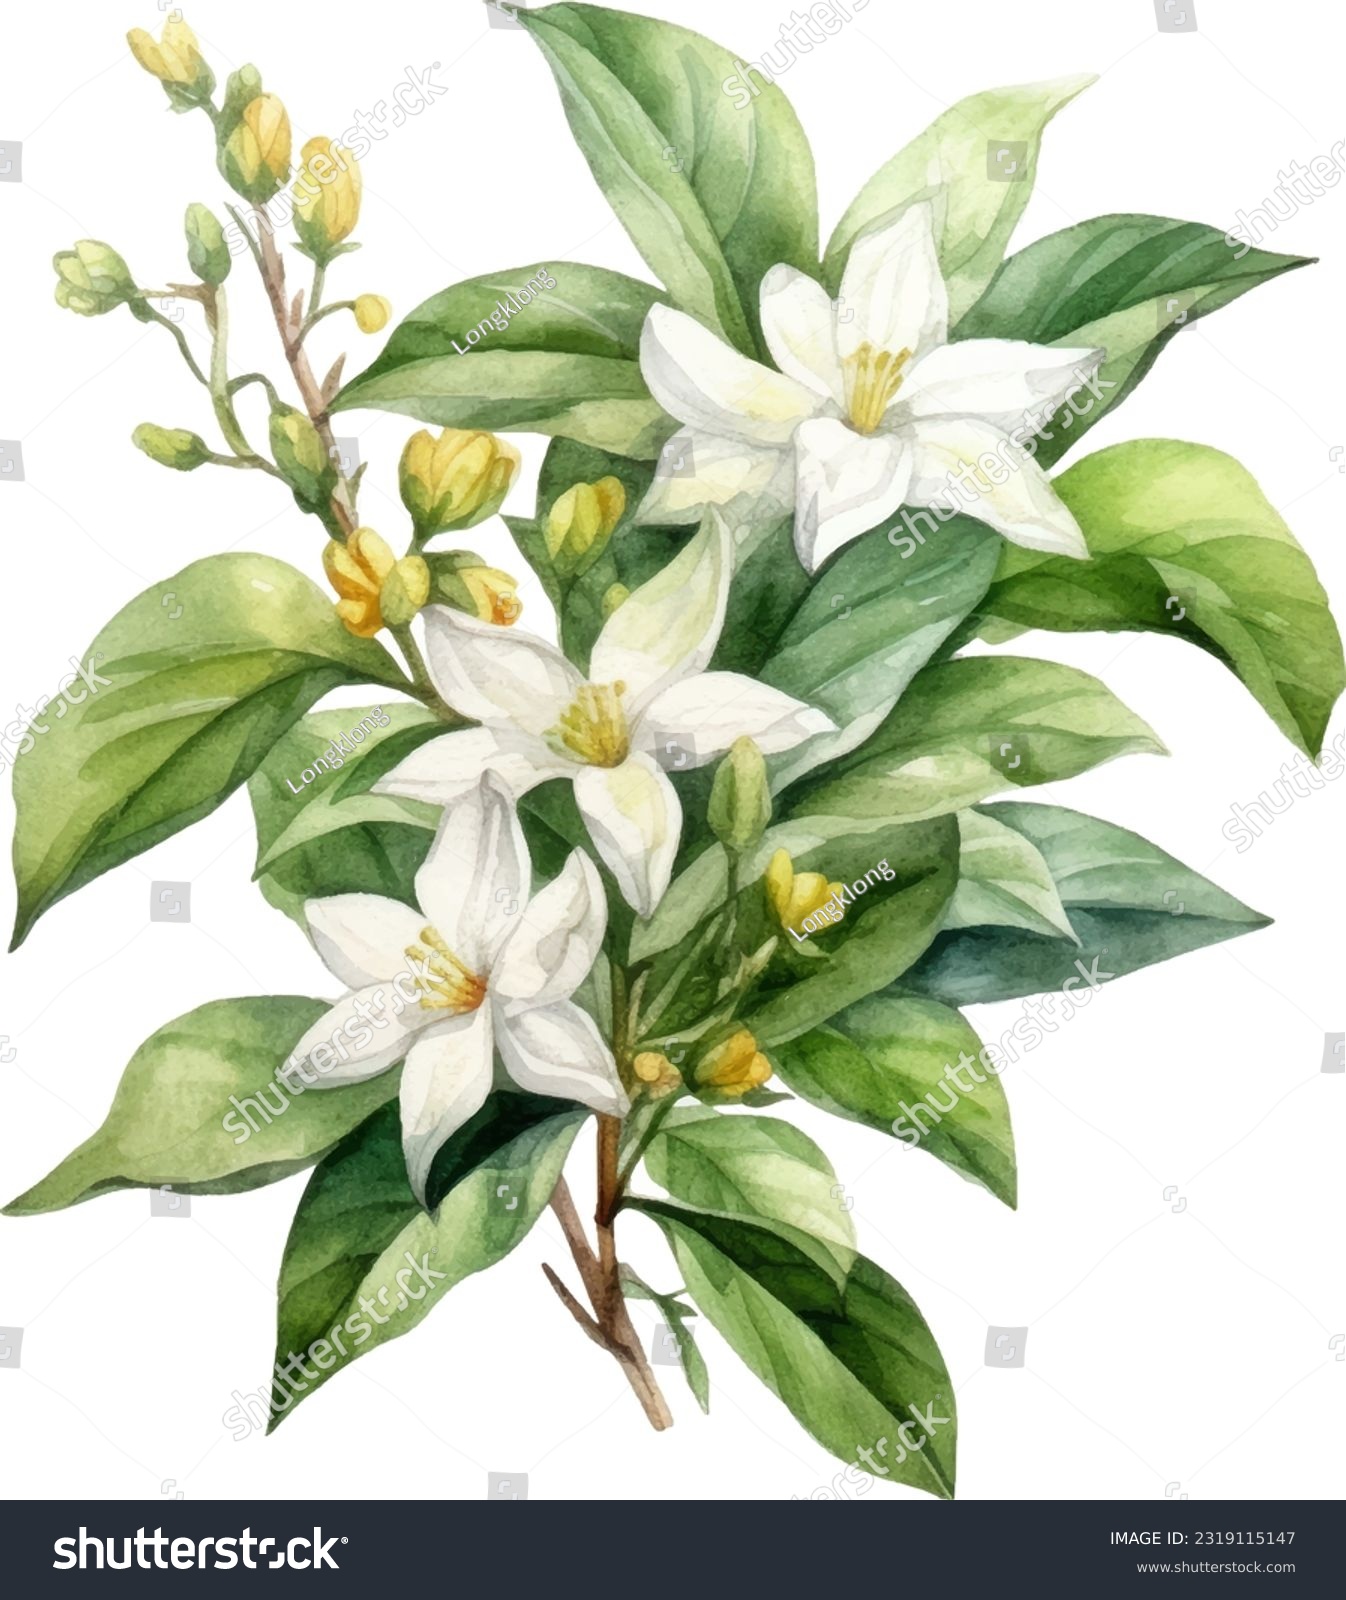 Asiatic Jasmine Watercolor illustration. Hand drawn underwater element design. Artistic vector marine design element. Illustration for greeting cards, printing and other design projects. #2319115147